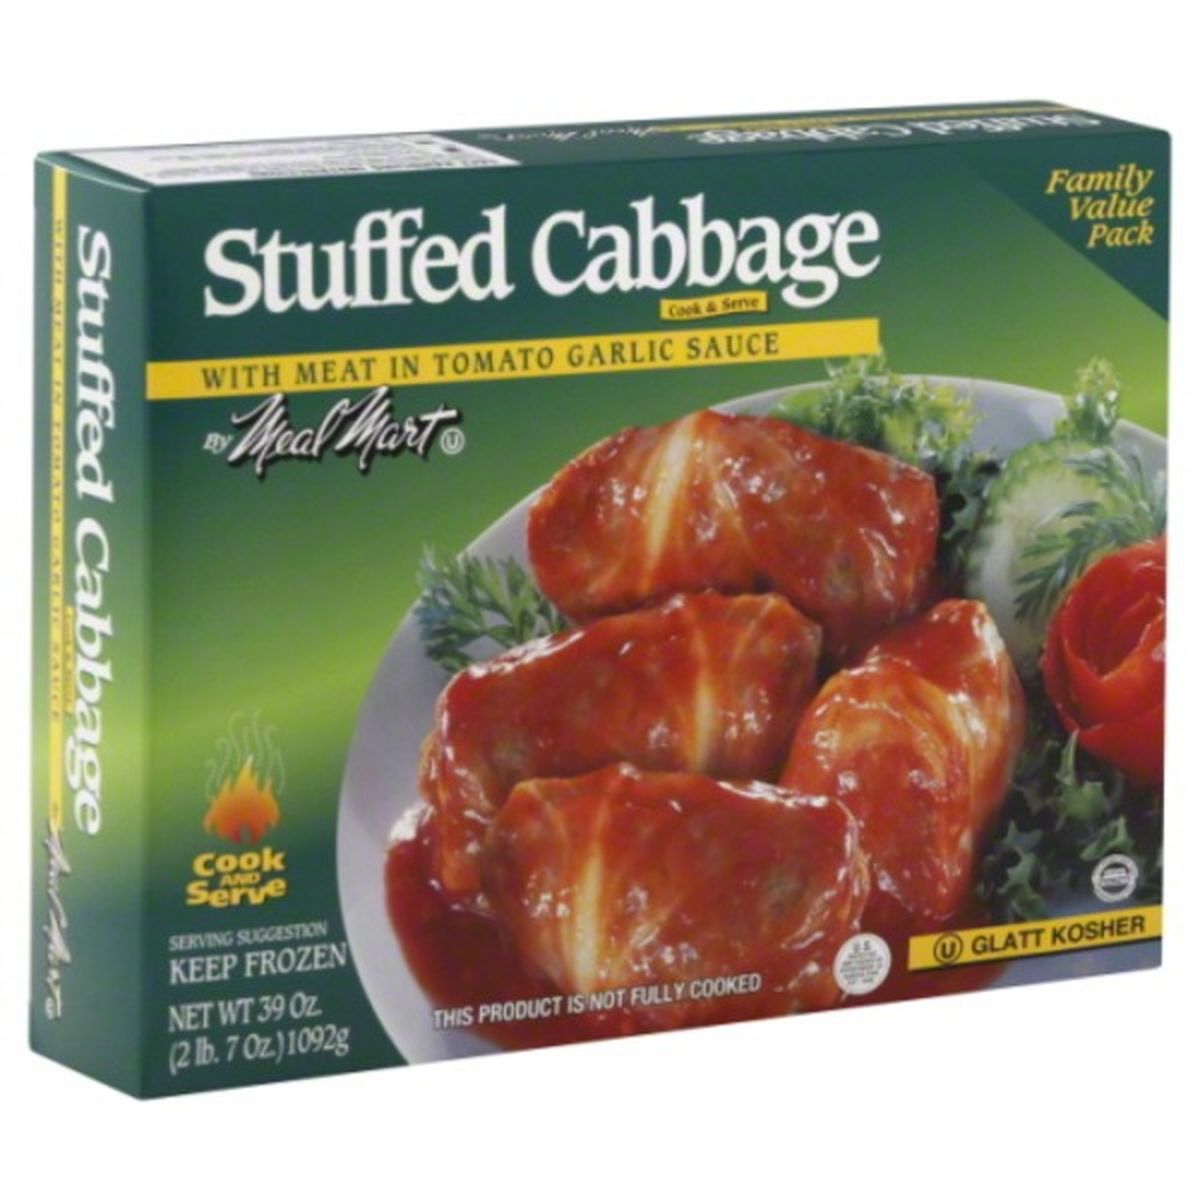 Calories in Meal Mar Stuffed Cabbage, with Meat in Tomato Garlic Sauce, Family Value Pack